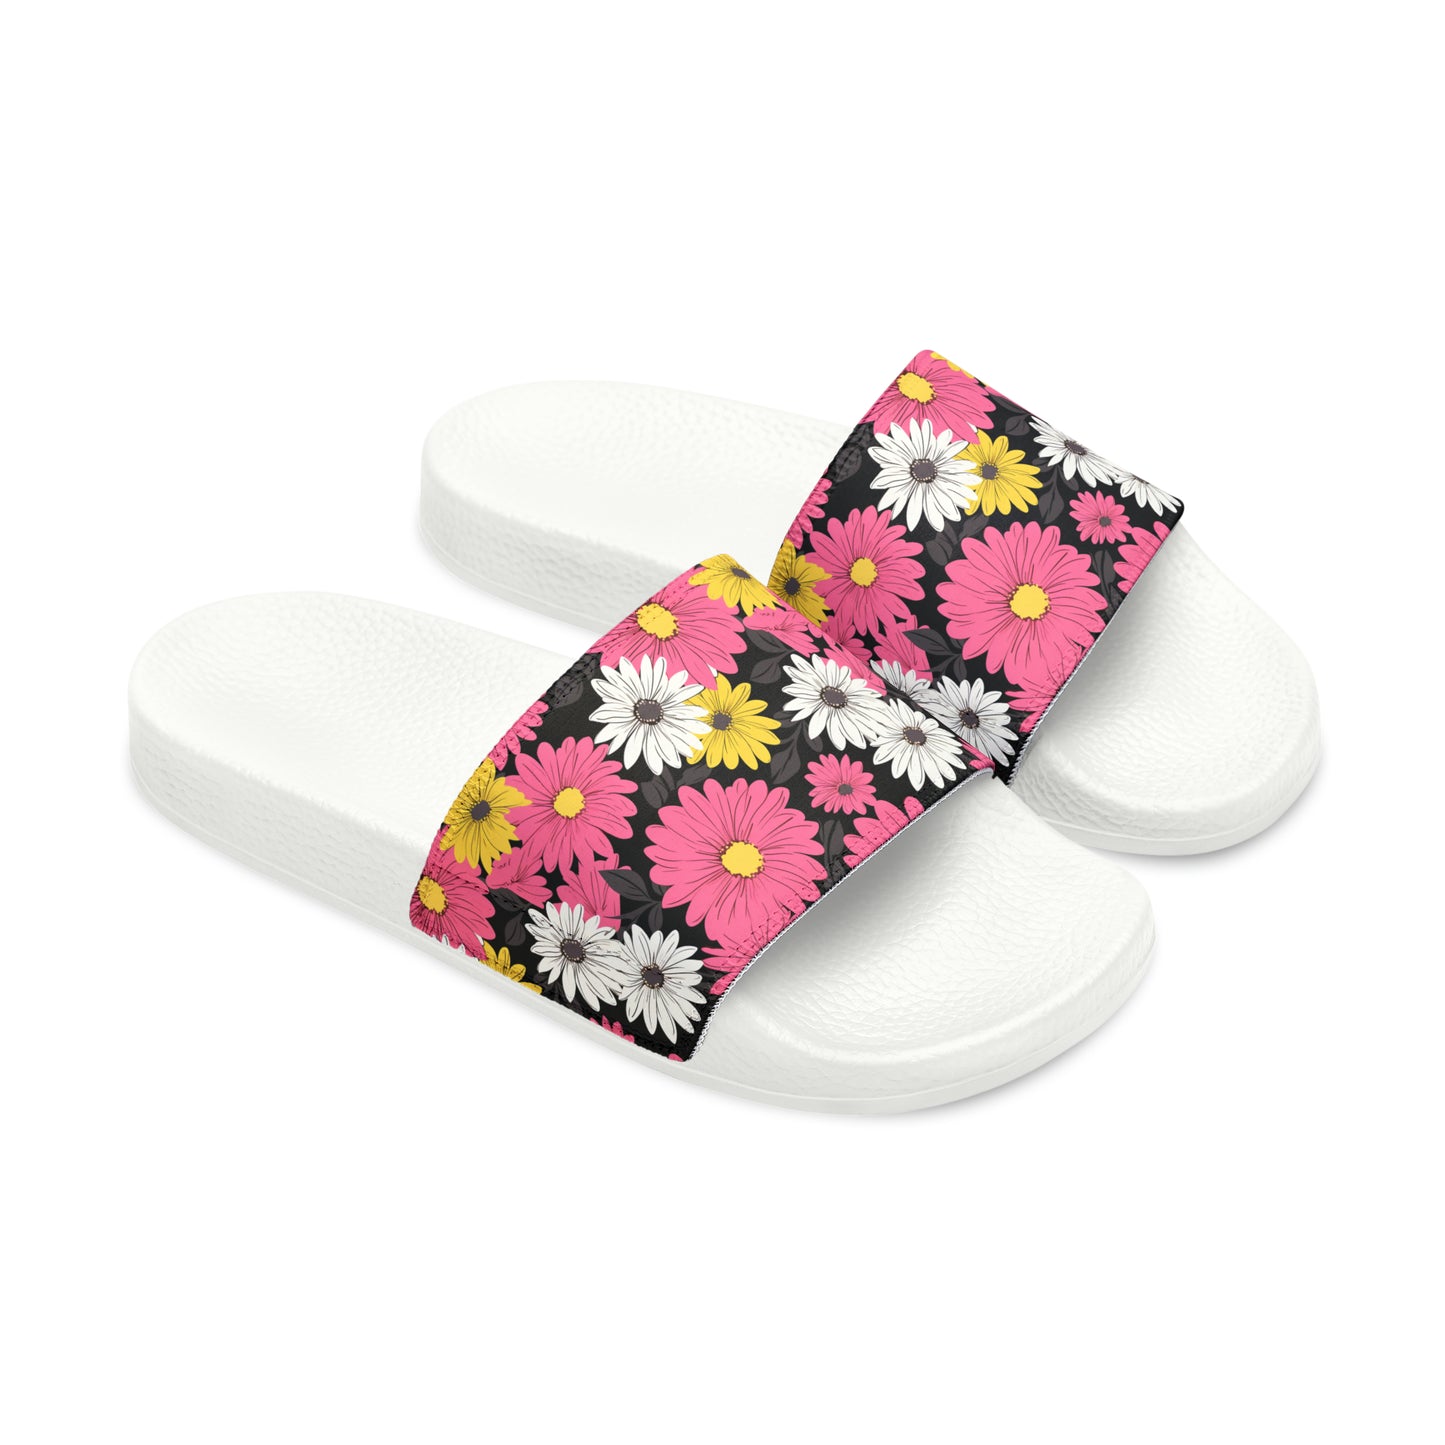 Flowers and Comfort for Her, Women's PU Slide Sandals